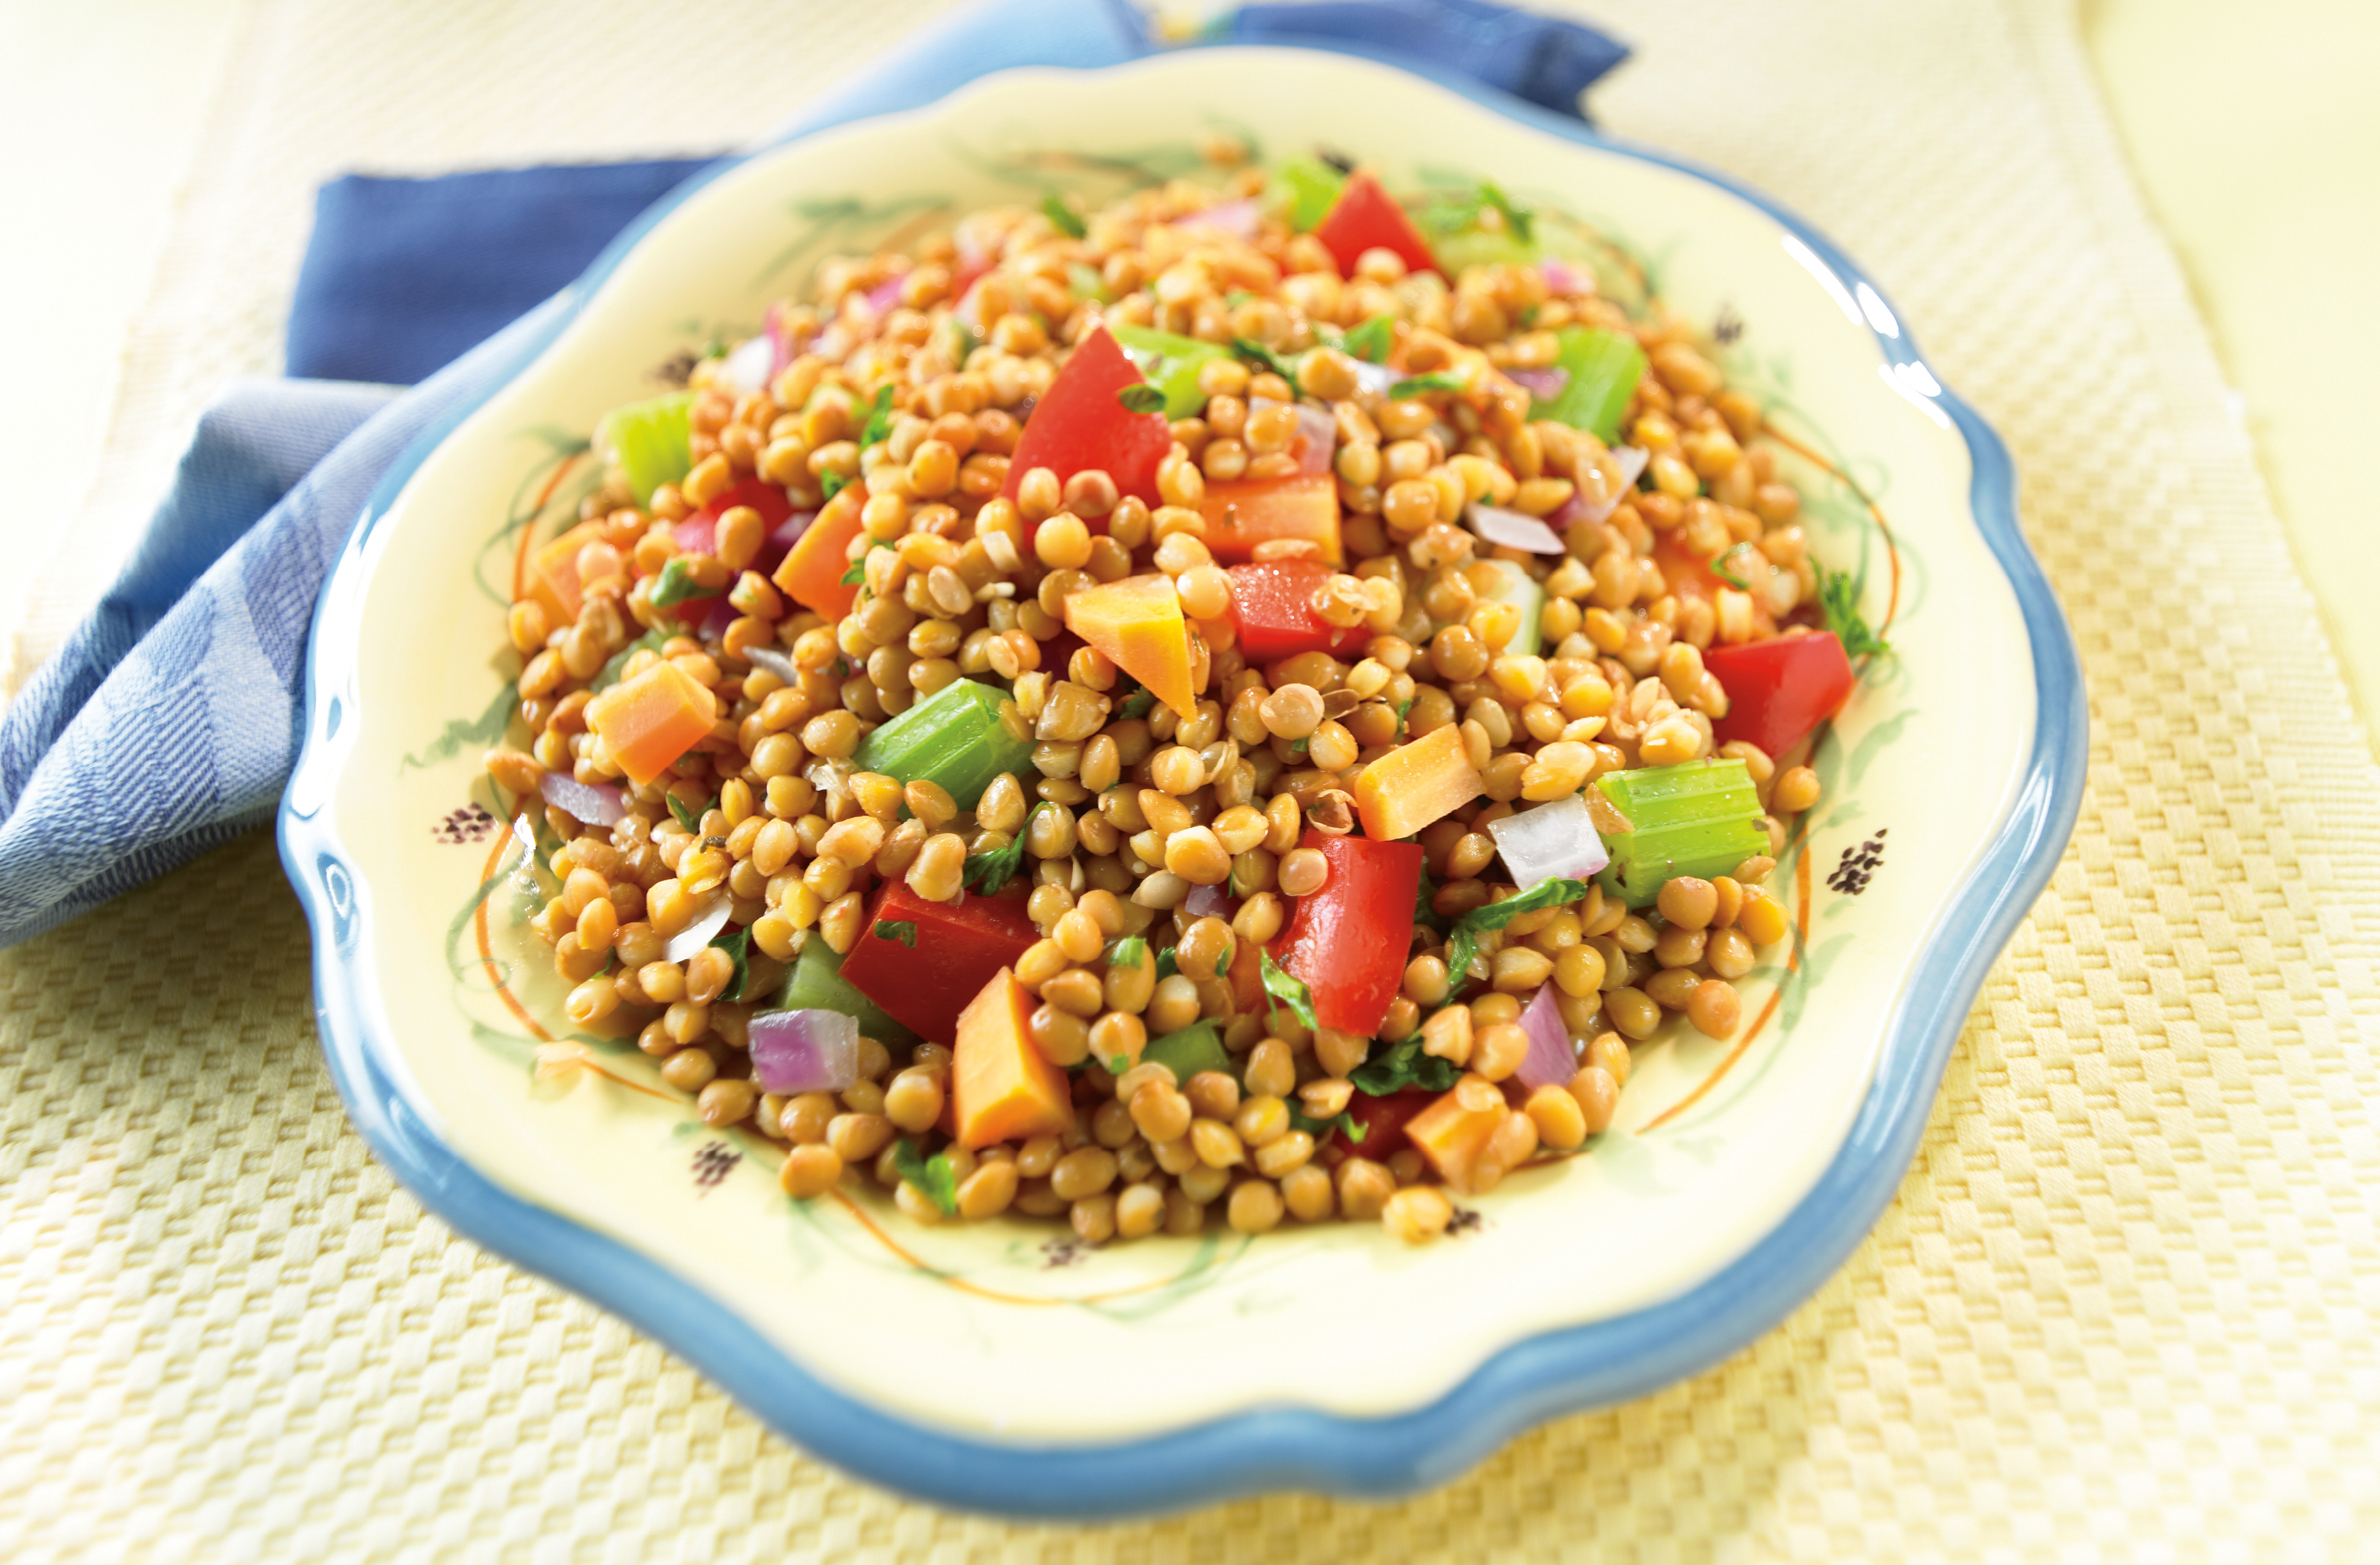 A bowl of warm lentil salad with red onion, carrot, celery & red pepper
